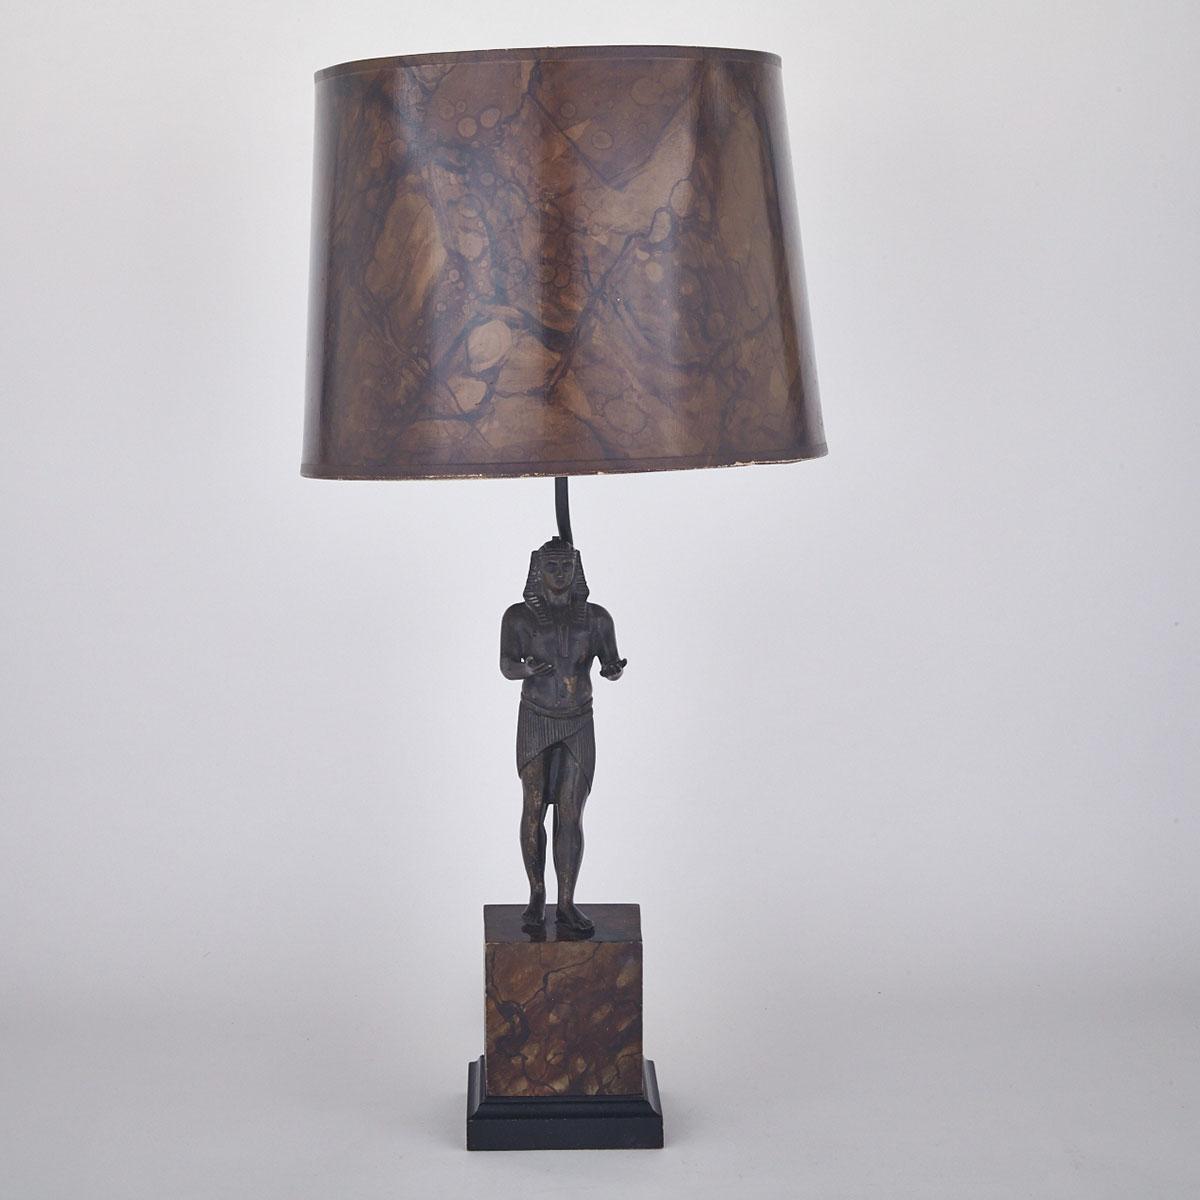 Egyptian Revival Patinated Bronze Figural Table Lamp, 19th and mid 20th century